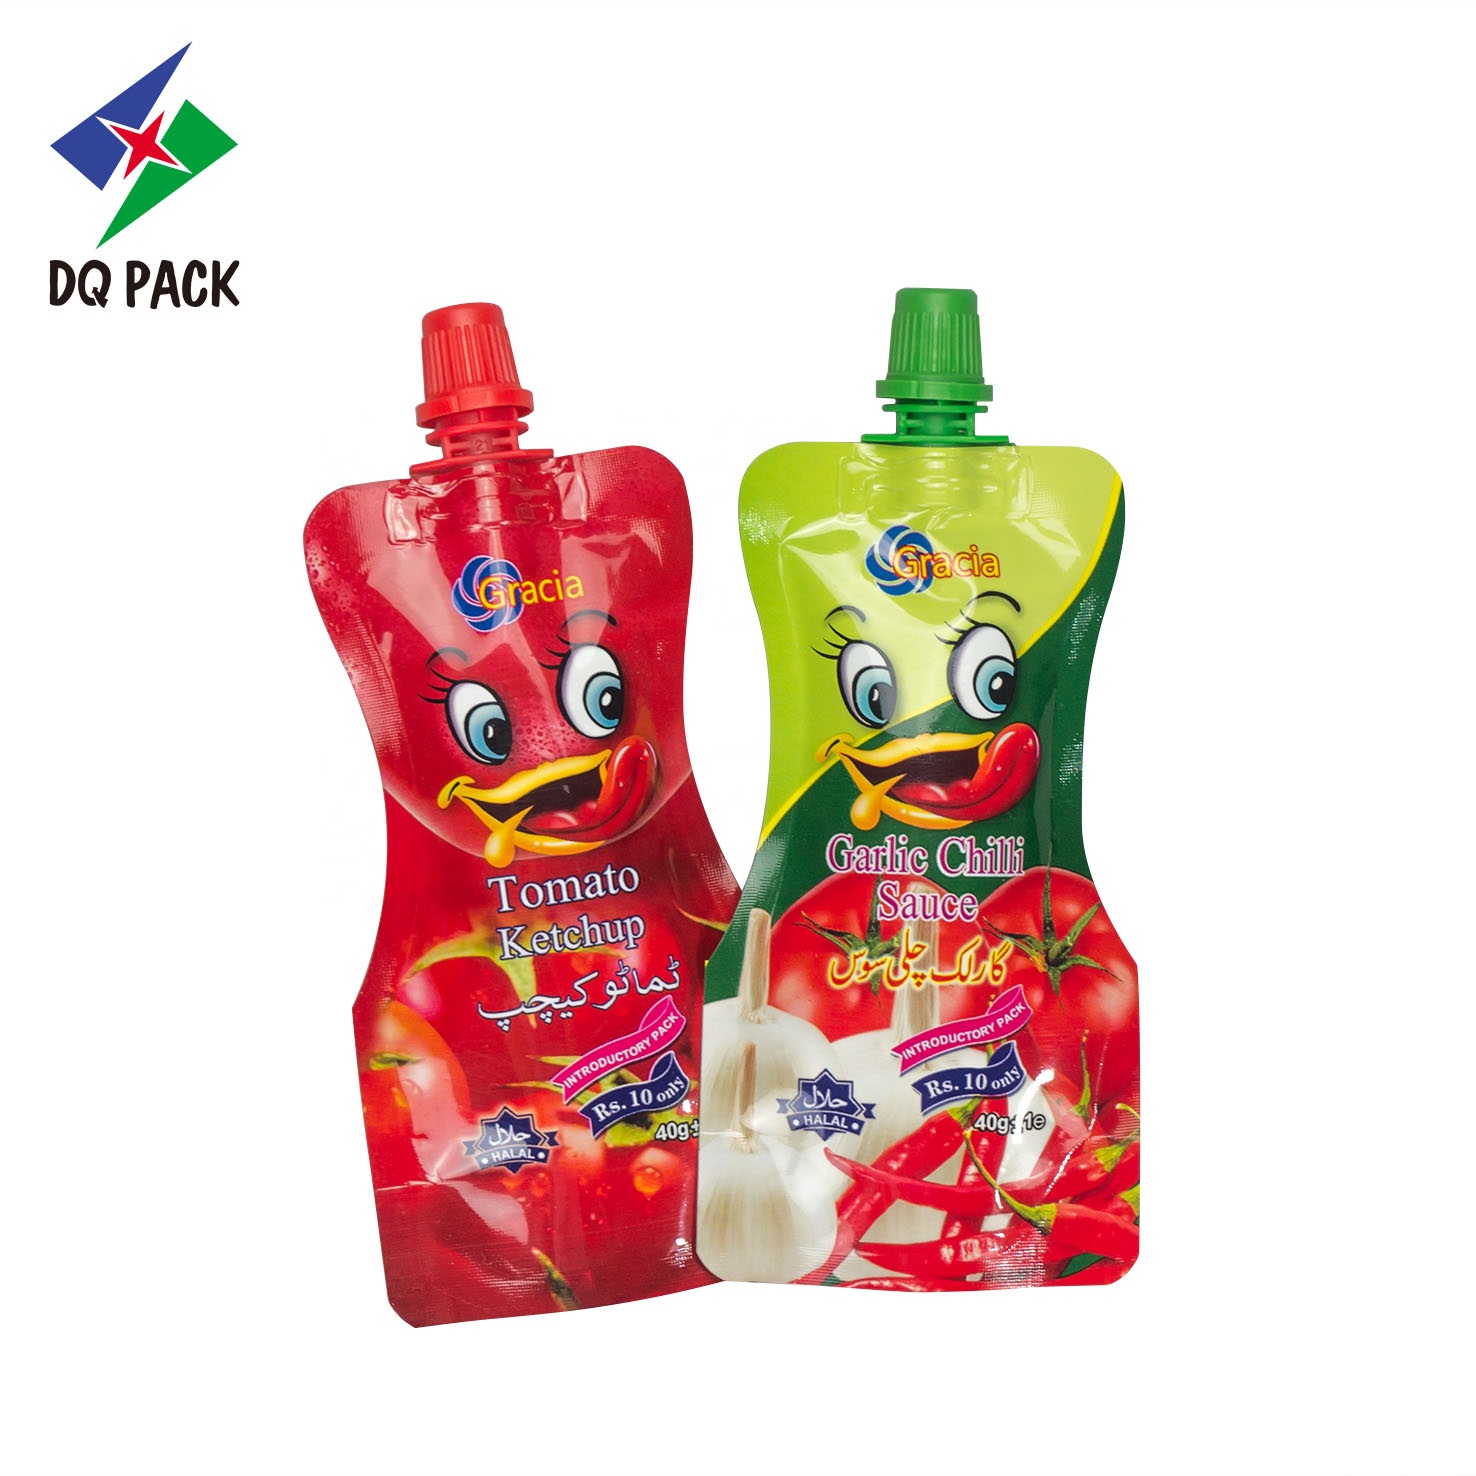 DQ PACK Custom Printed Big Capacity Juice Spout Pouch Special Shape Nozzle Bag With Lids